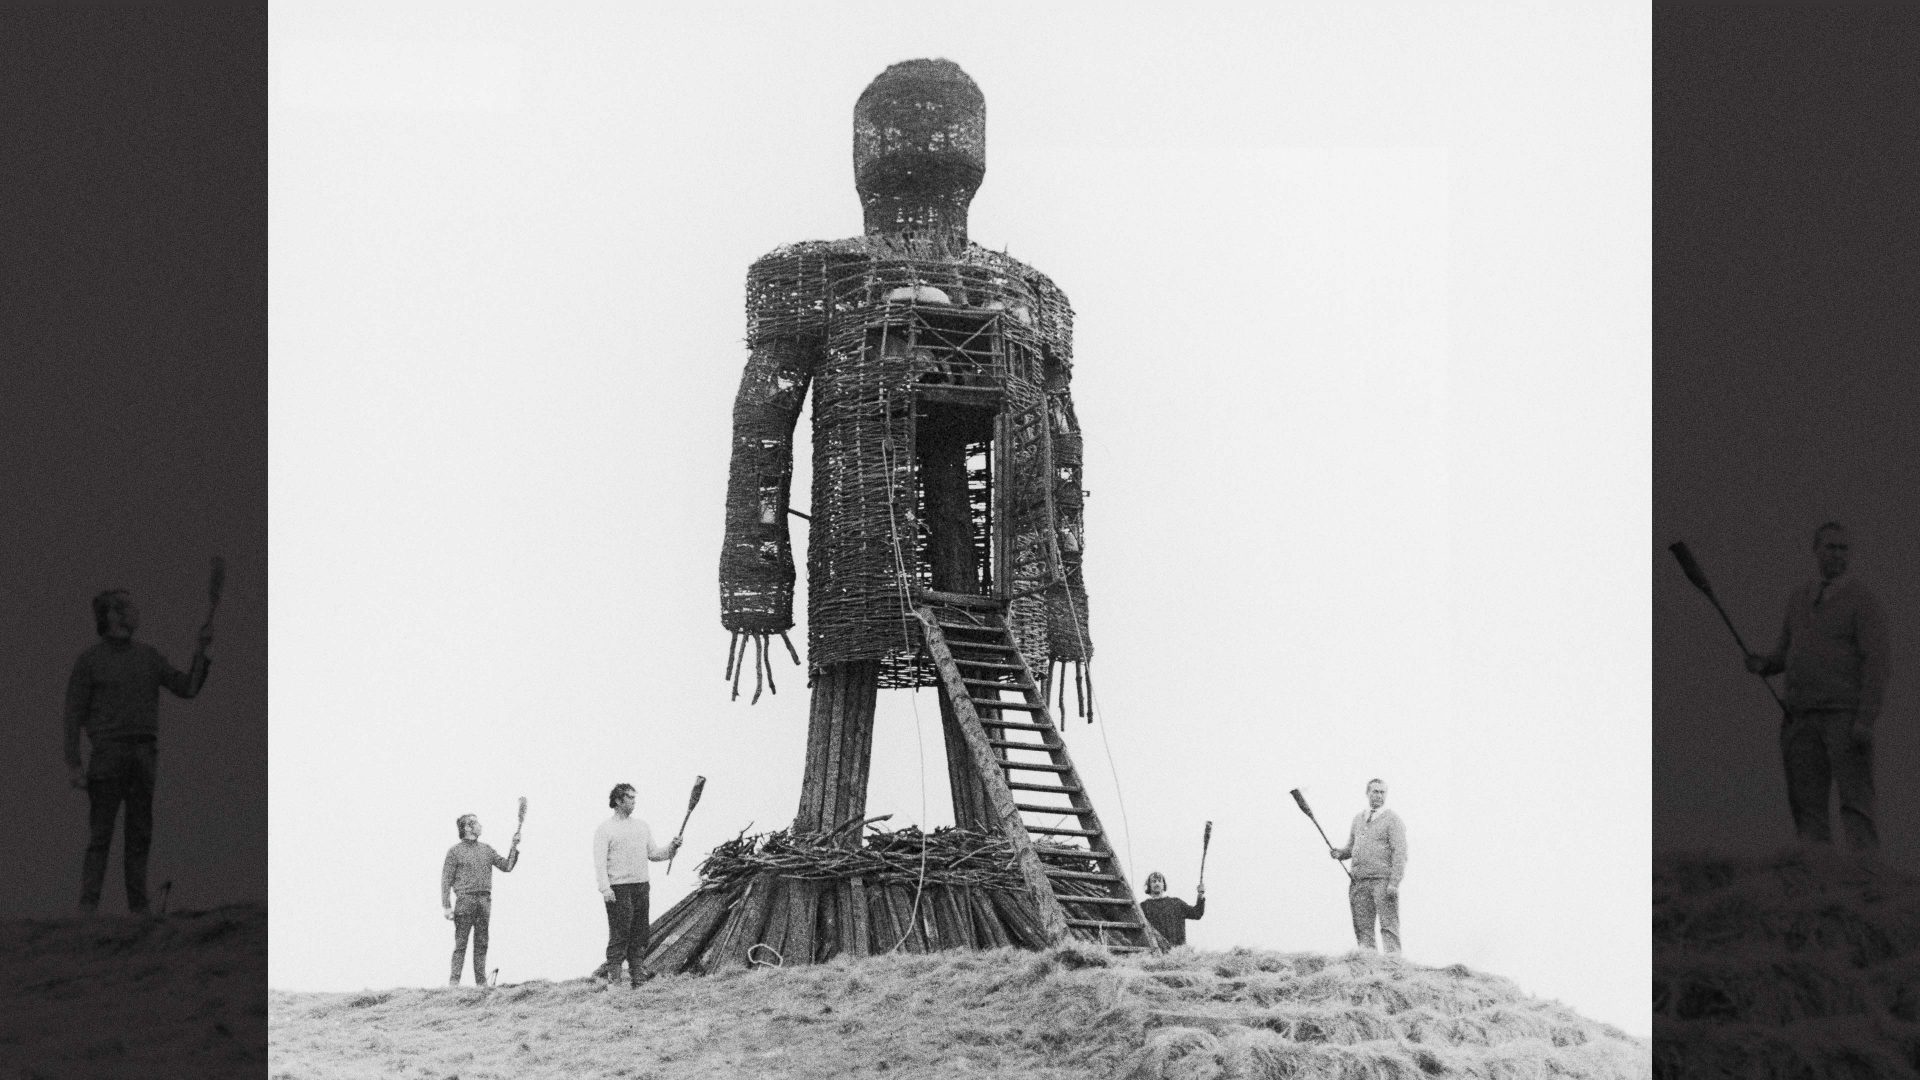 A chilling scene from the horror classic 'The Wicker Man', filmed on location in Scotland, 1973. Photo: Archive Photos/Getty Images